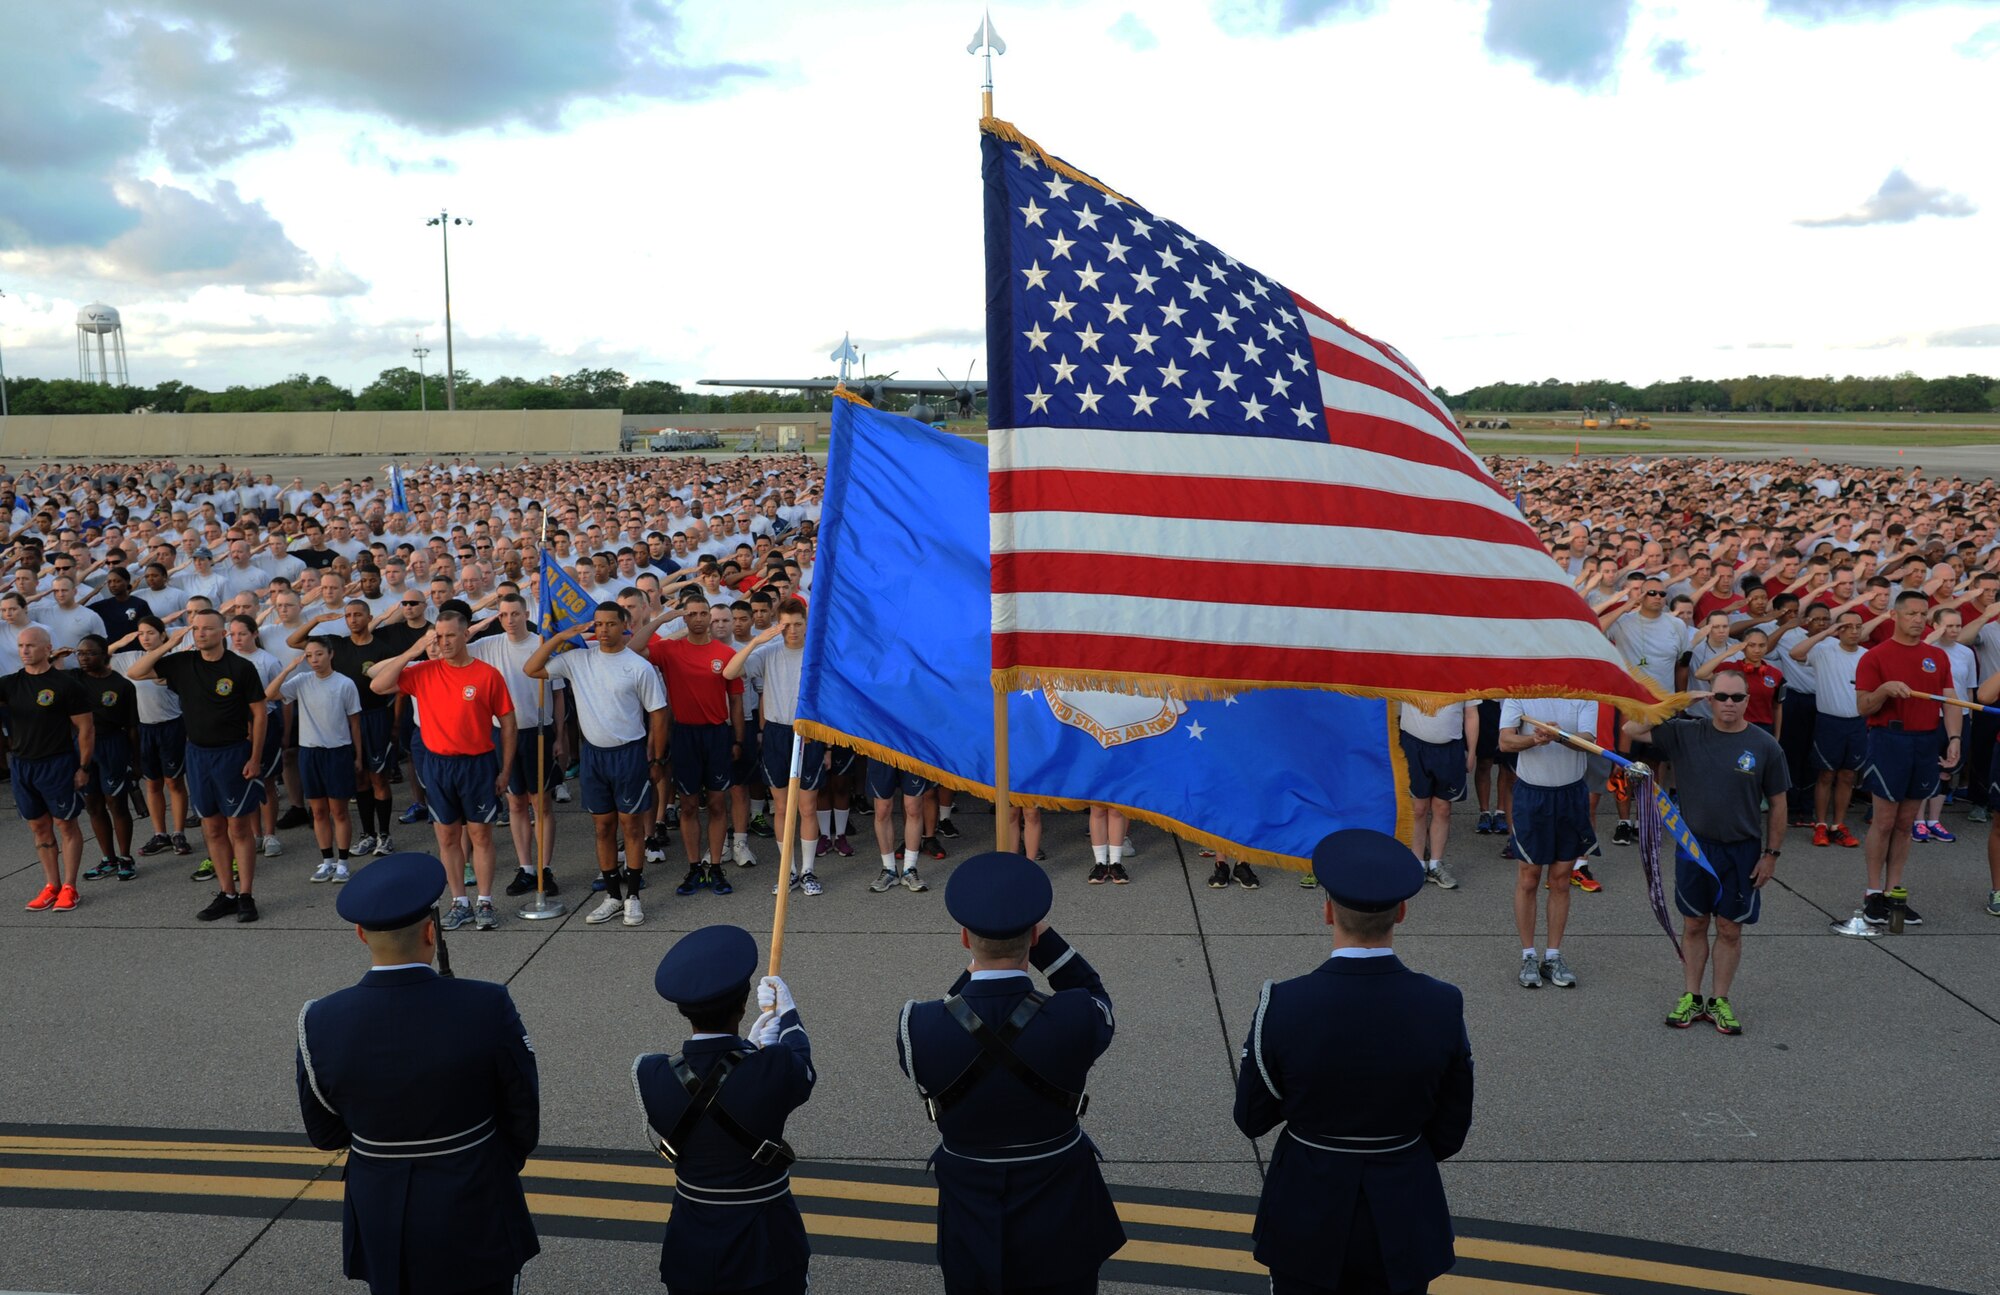 Keesler Airmen render a salute as the national anthem is sung prior to the start of a 5K run April 25, 2016, Keesler Air Force Base, Miss. The run was the kickoff event for a week full of activities supporting Wingman Week. (U.S. Air Force photo by Kemberly Groue)